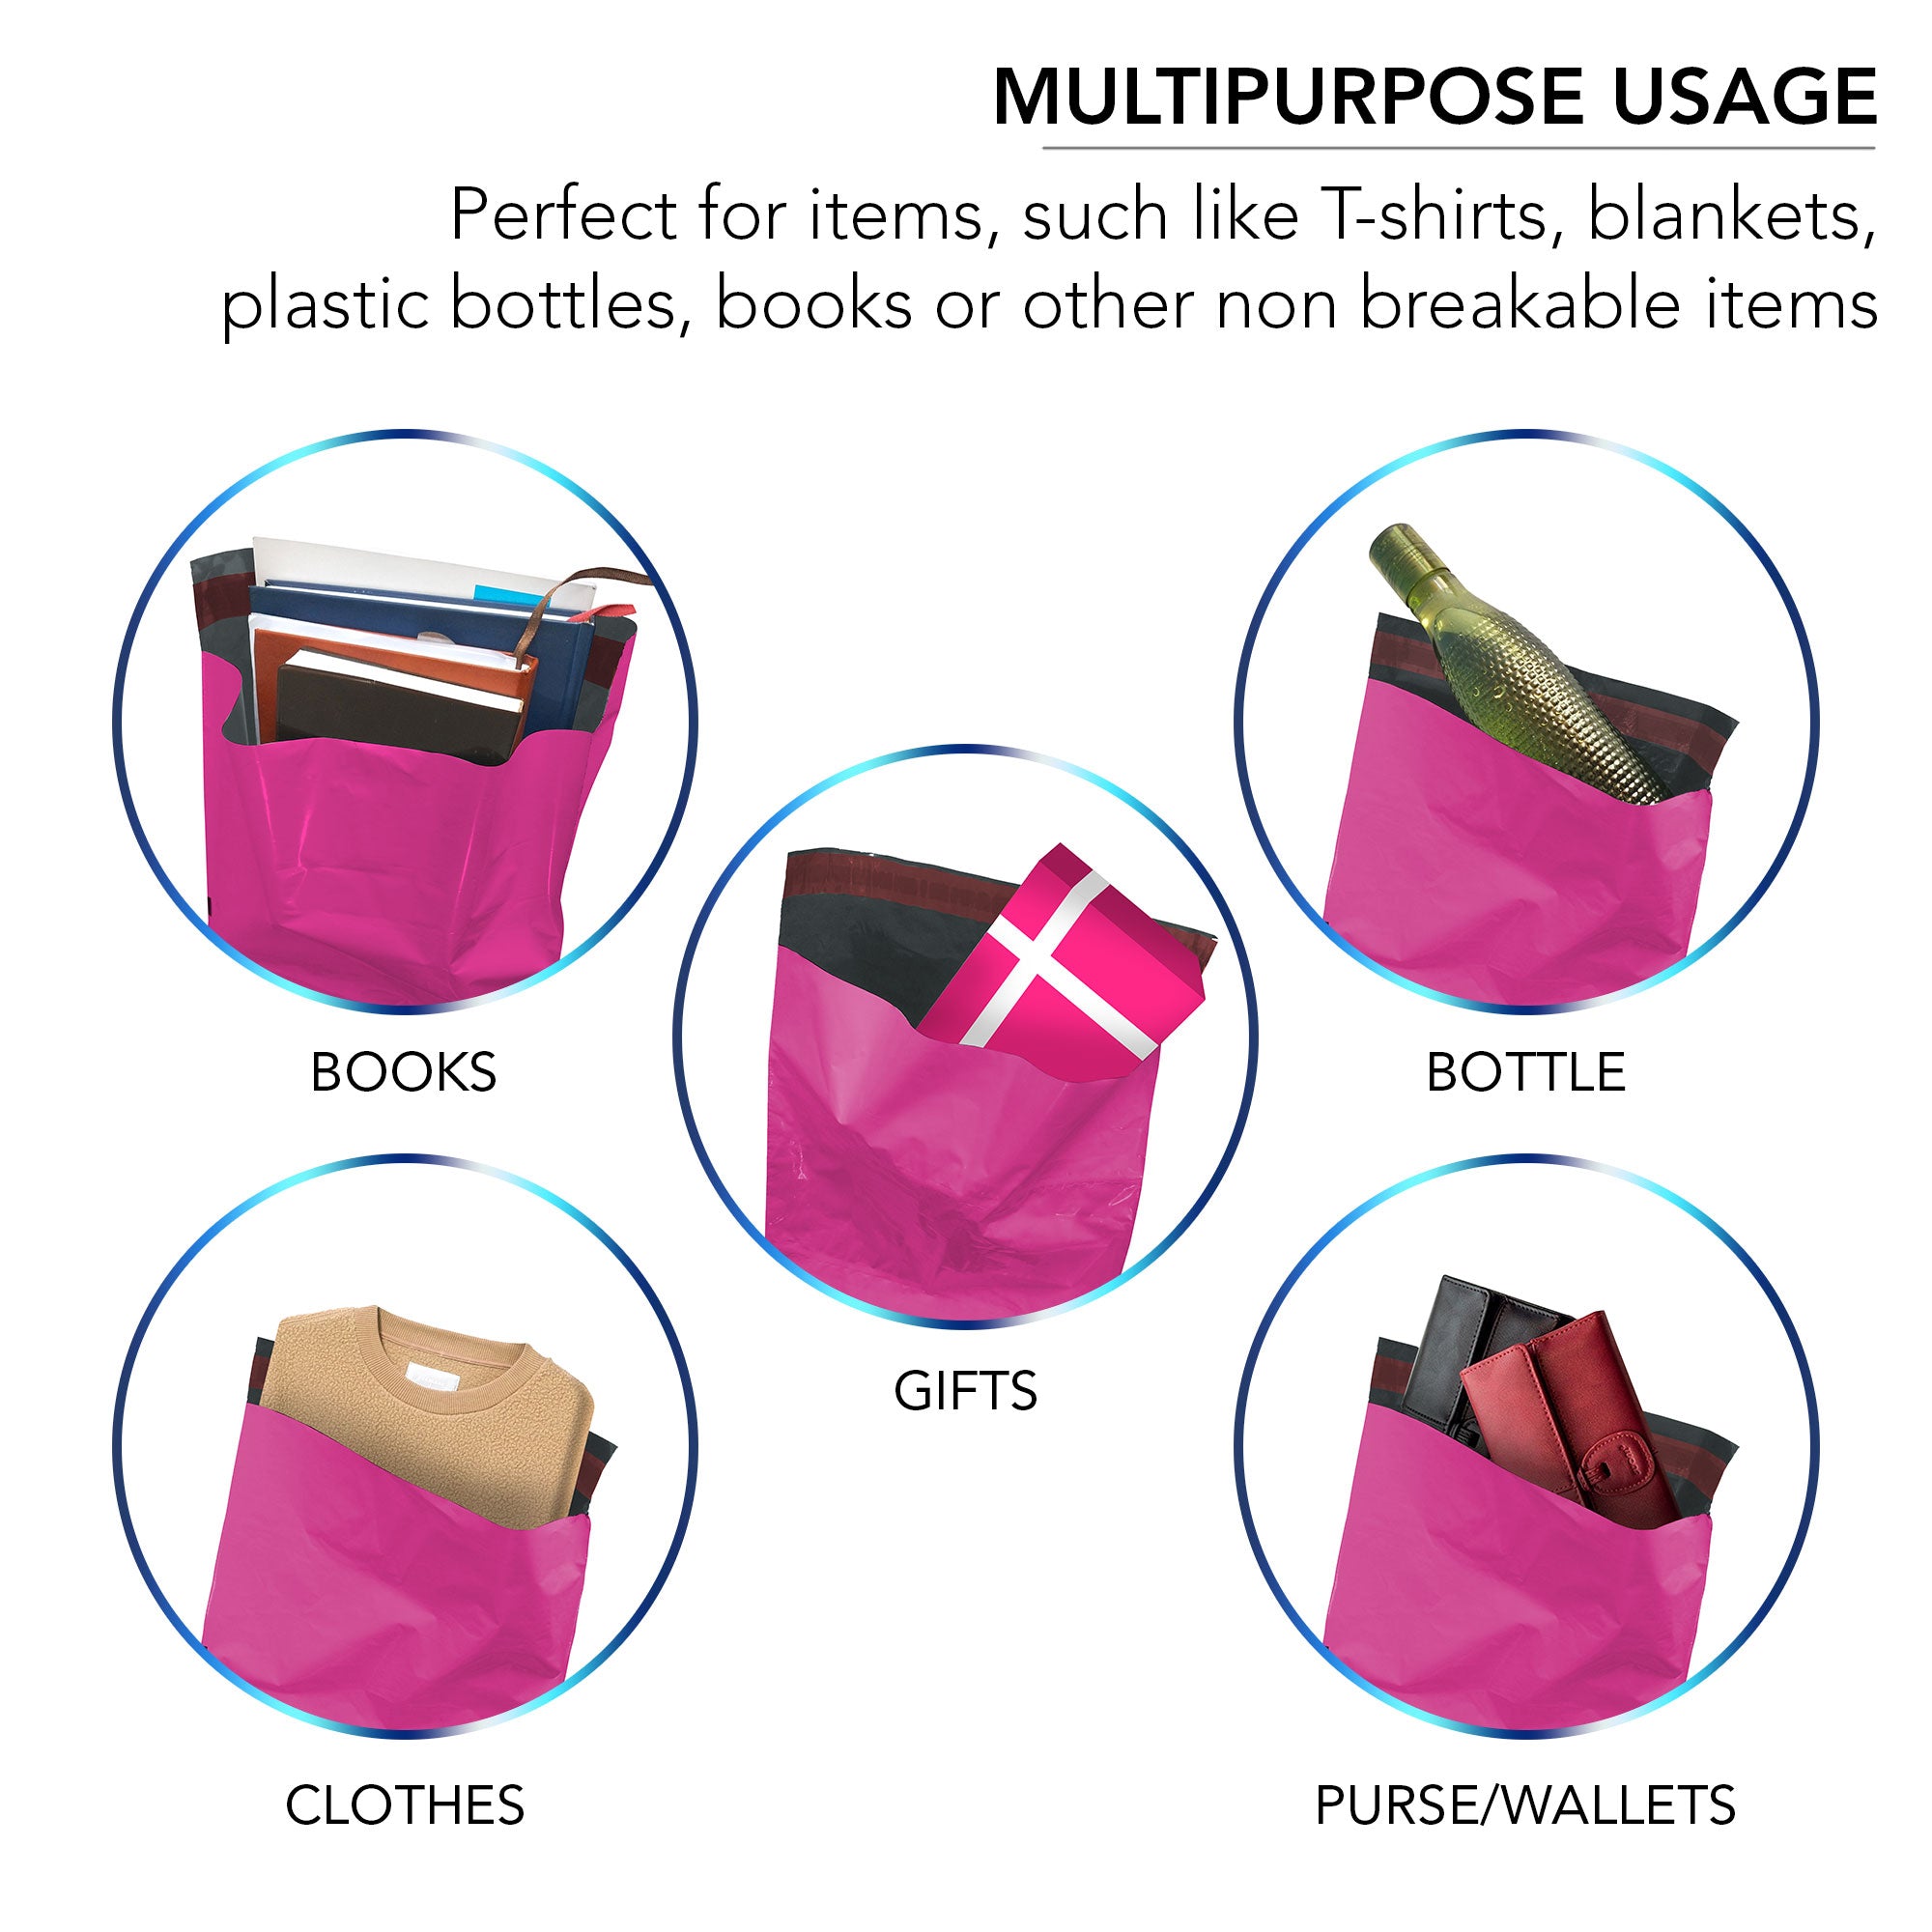 Hot Pink Poly-Mailing Postage Bags Self Seal Postal Bags Packaging Bags